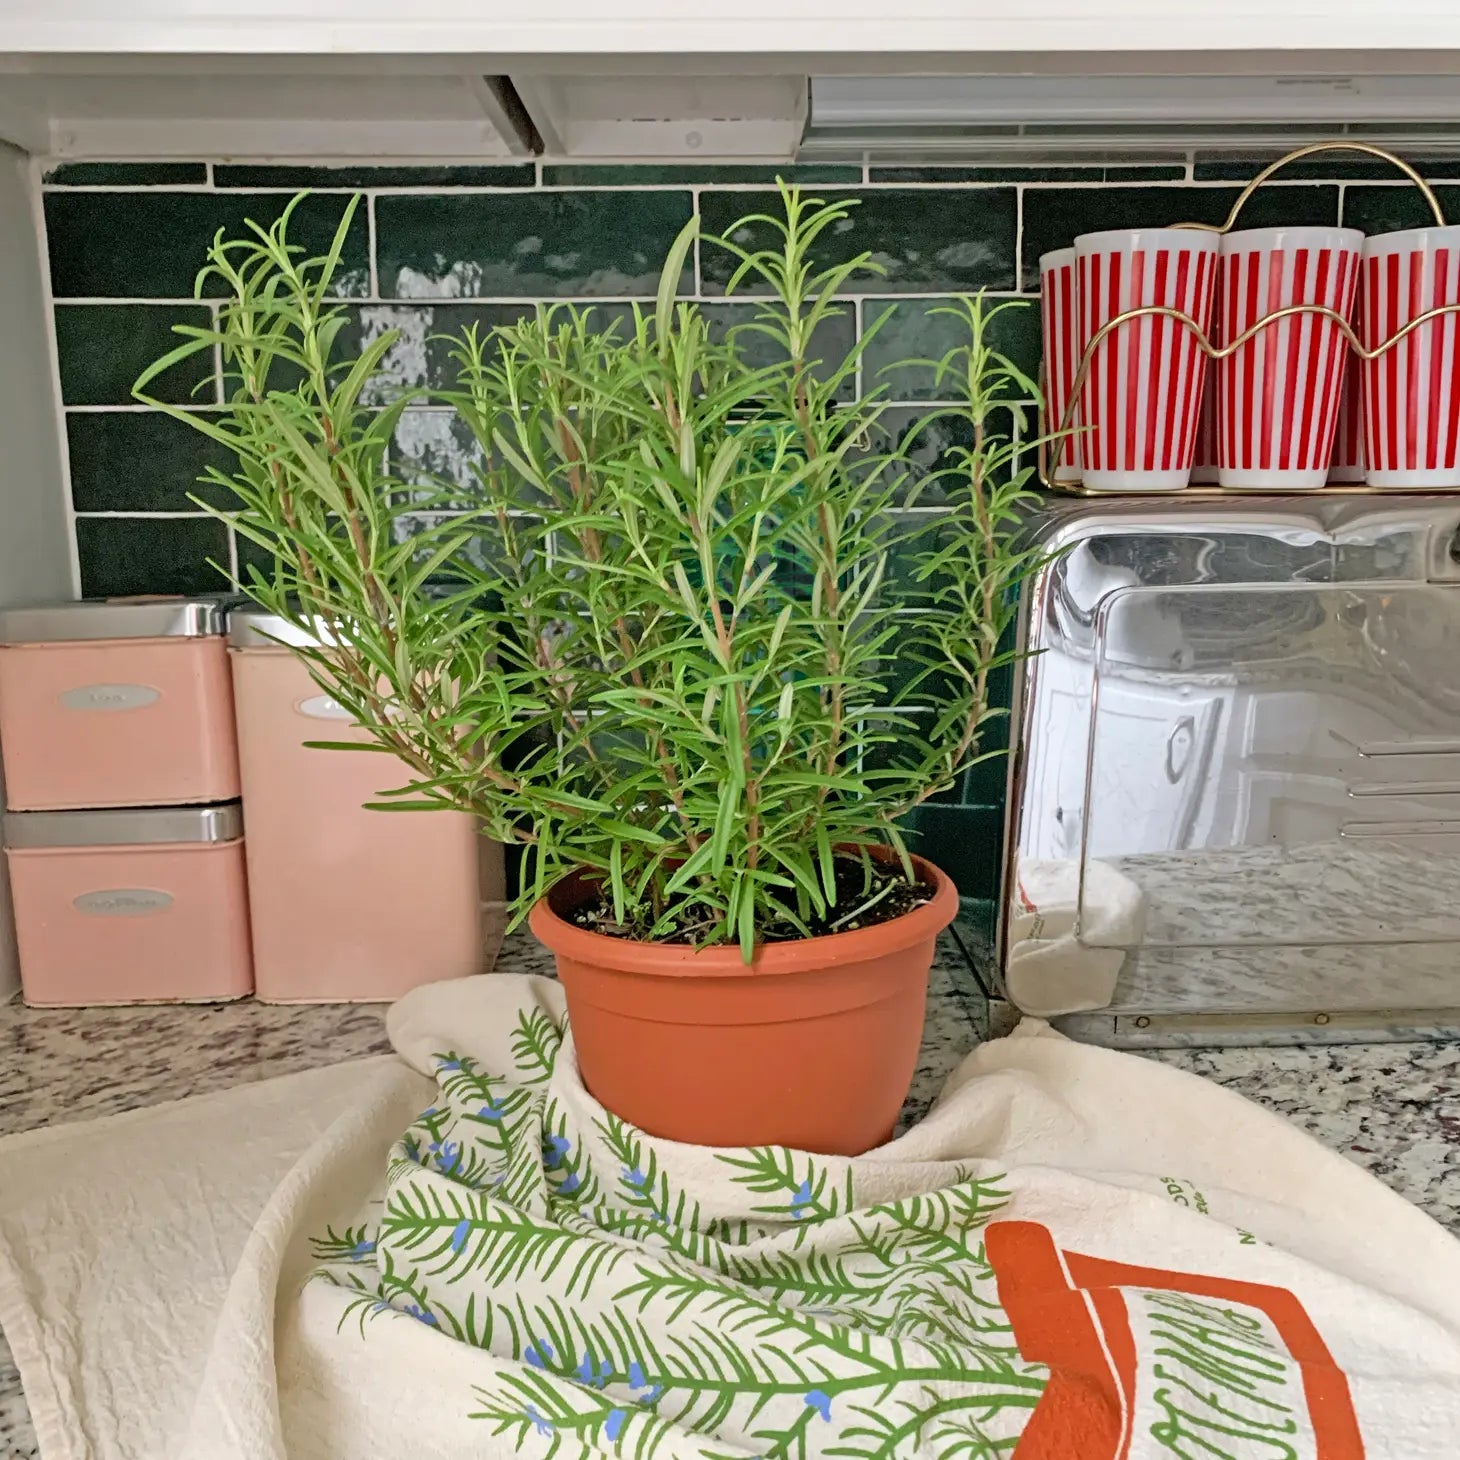 The rosemary herb tea towel is sure to freshen up your kitchen and brighten your everyday.  Made from 100% flour sack cotton, our Rosemary dish towel and will only get softer and more absorbent over the years in your kitchen. This generously sized dish towel can handle small and big tasks in the kitchen as well as household chores.